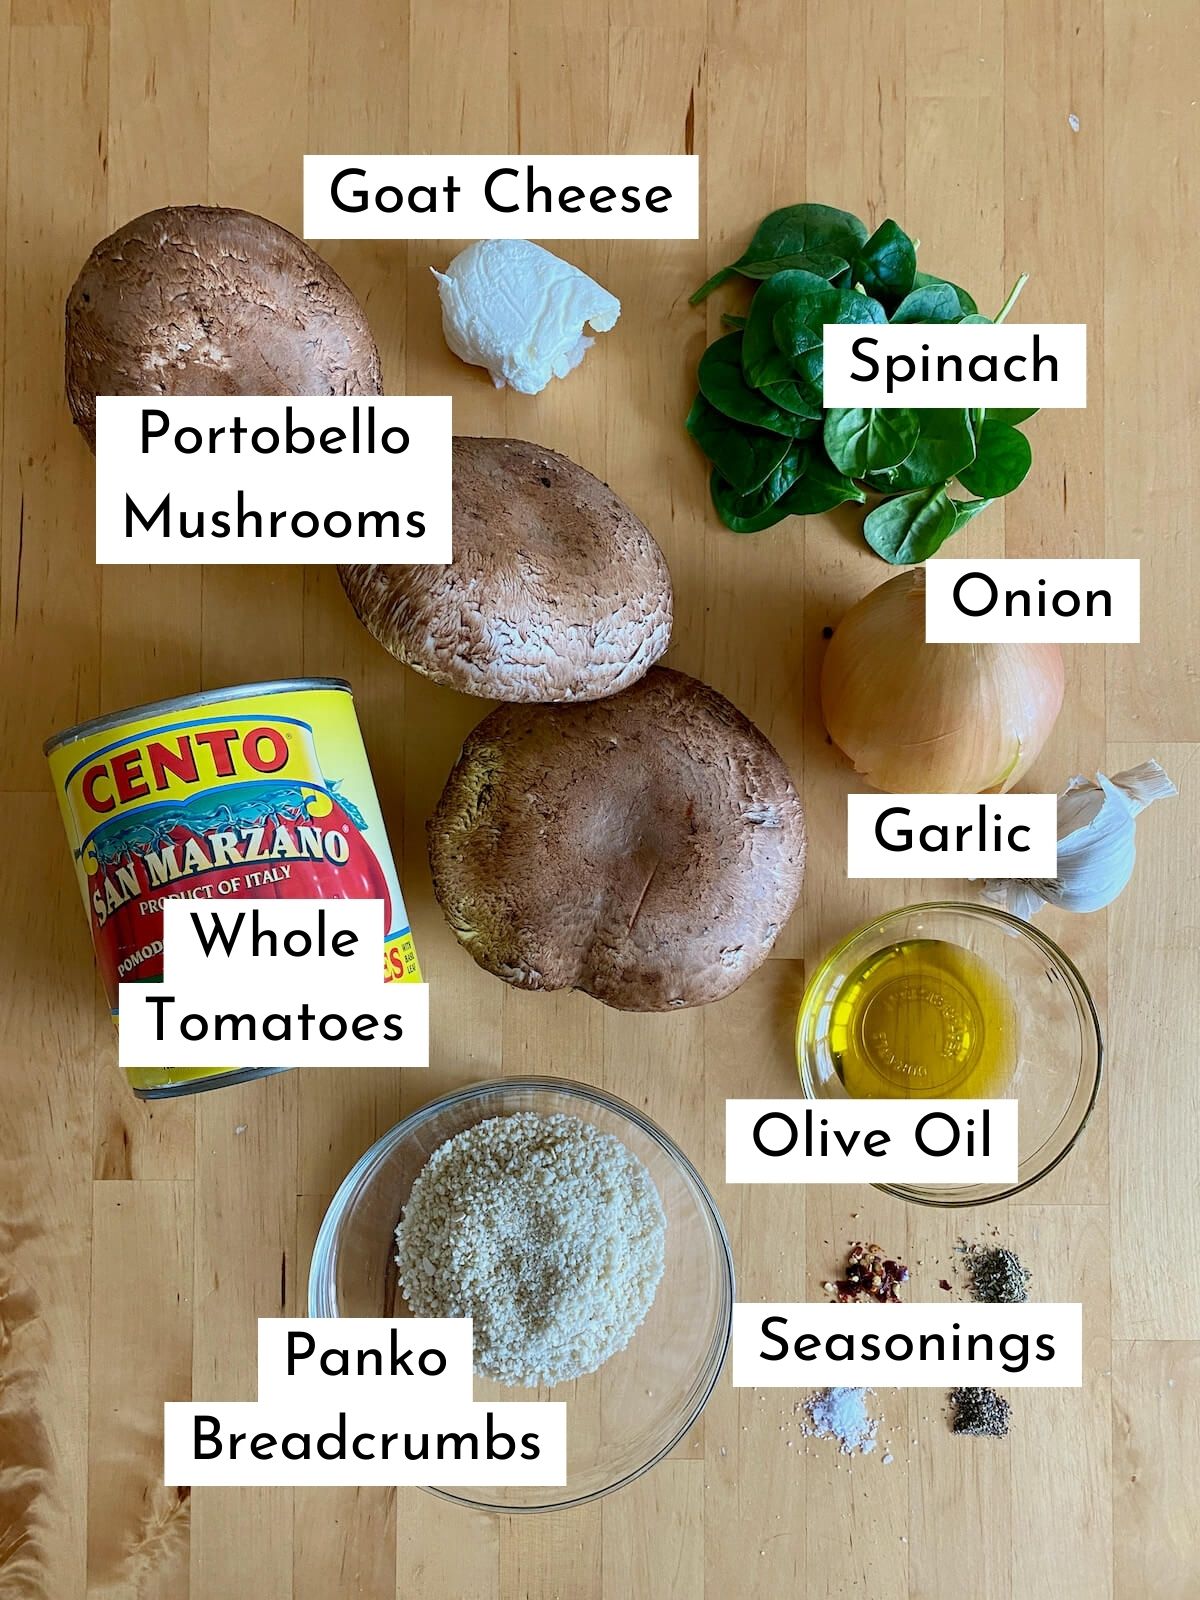 The ingredients to make stuffed portobello mushrooms with text labeling each ingredient. Ingredients include portobello mushrooms, goat cheese, spinach, whole tomatoes, onion, garlic, olive oil, panko breadcrumbs, and seasonings.